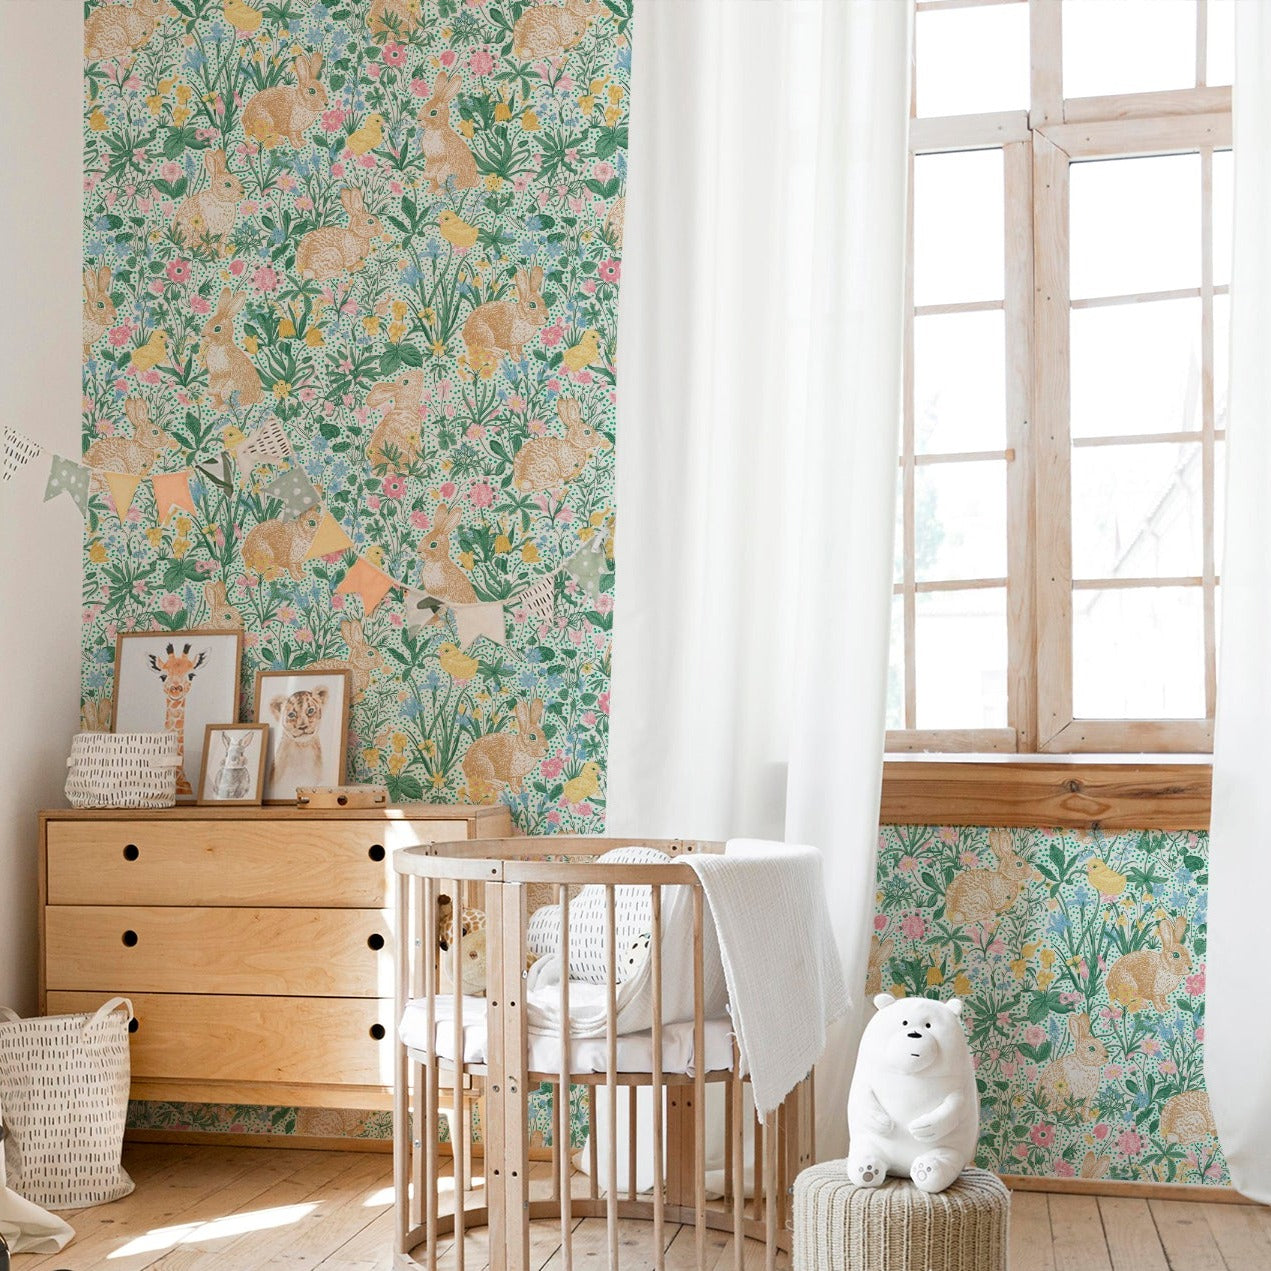 Bright and airy children's room featuring a colorful floral wallpaper with rabbits, birds, and a variety of flowers. The room includes wooden furniture, a circular crib, and playful decor items like a small ride-on car and a hopscotch rug."